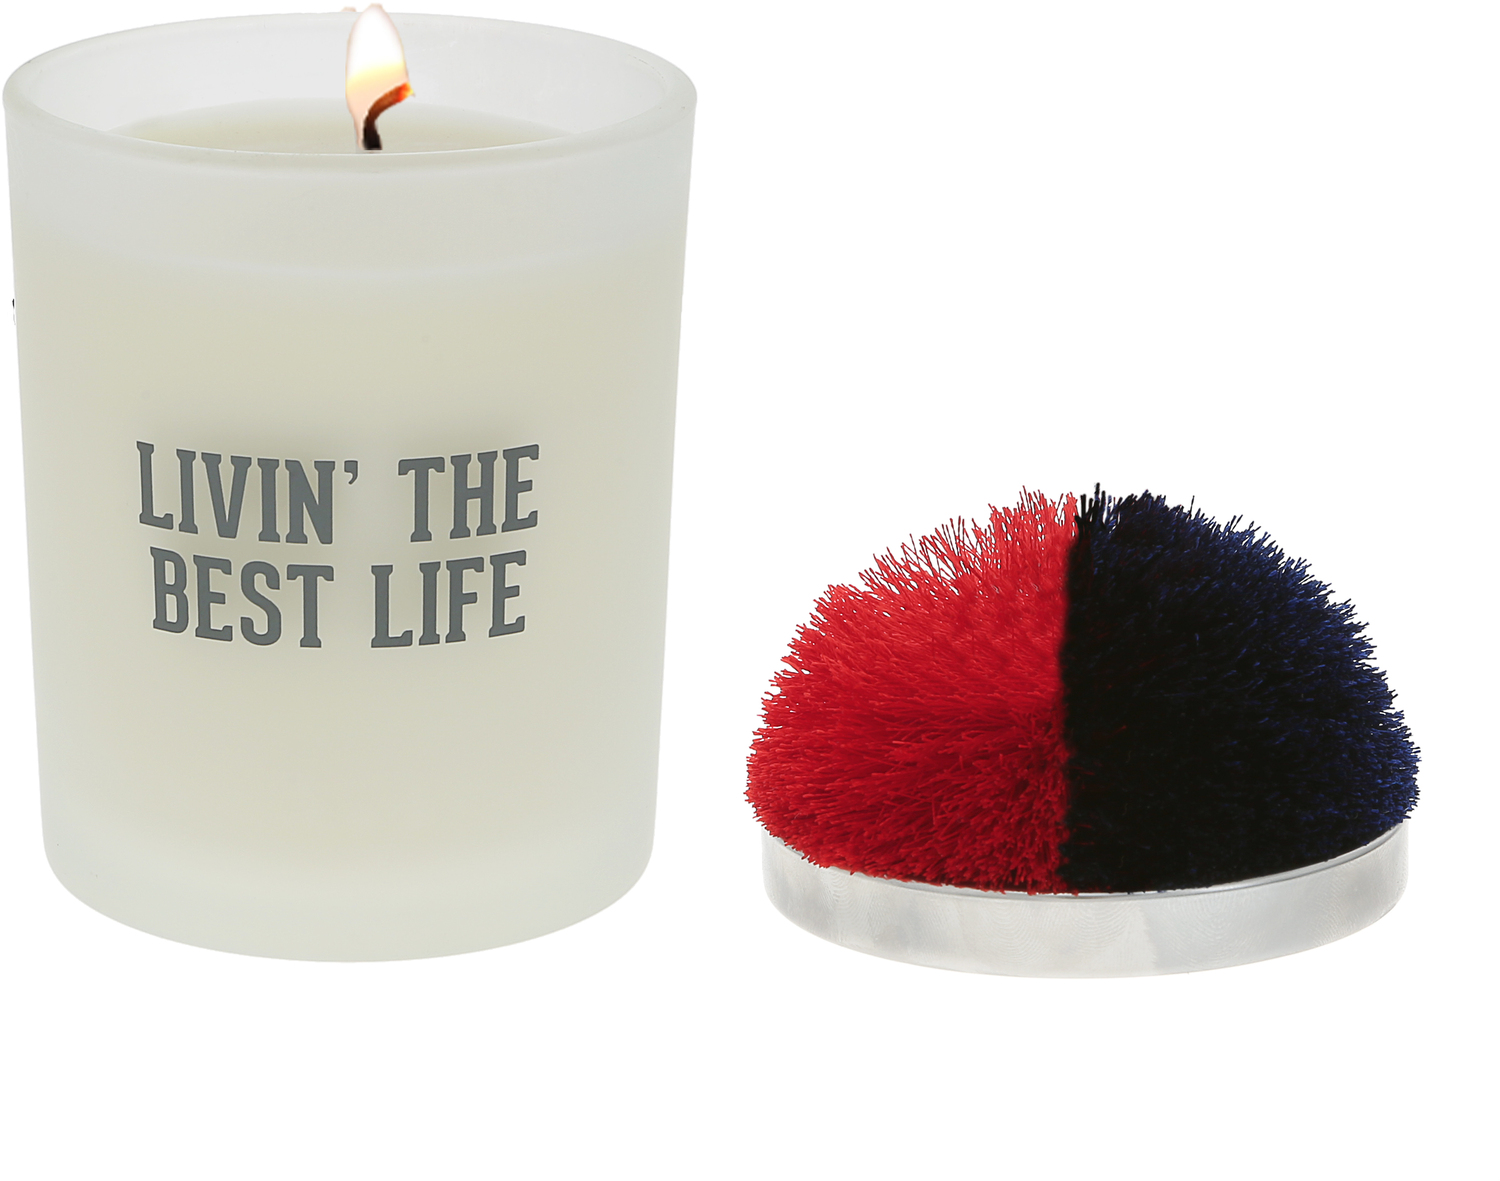 Best Life - Red & Navy by Repre-Scent - Best Life - Red & Navy - 5.5 oz - 100% Soy Wax Candle with Pom Pom Lid
Scent: Tranquility